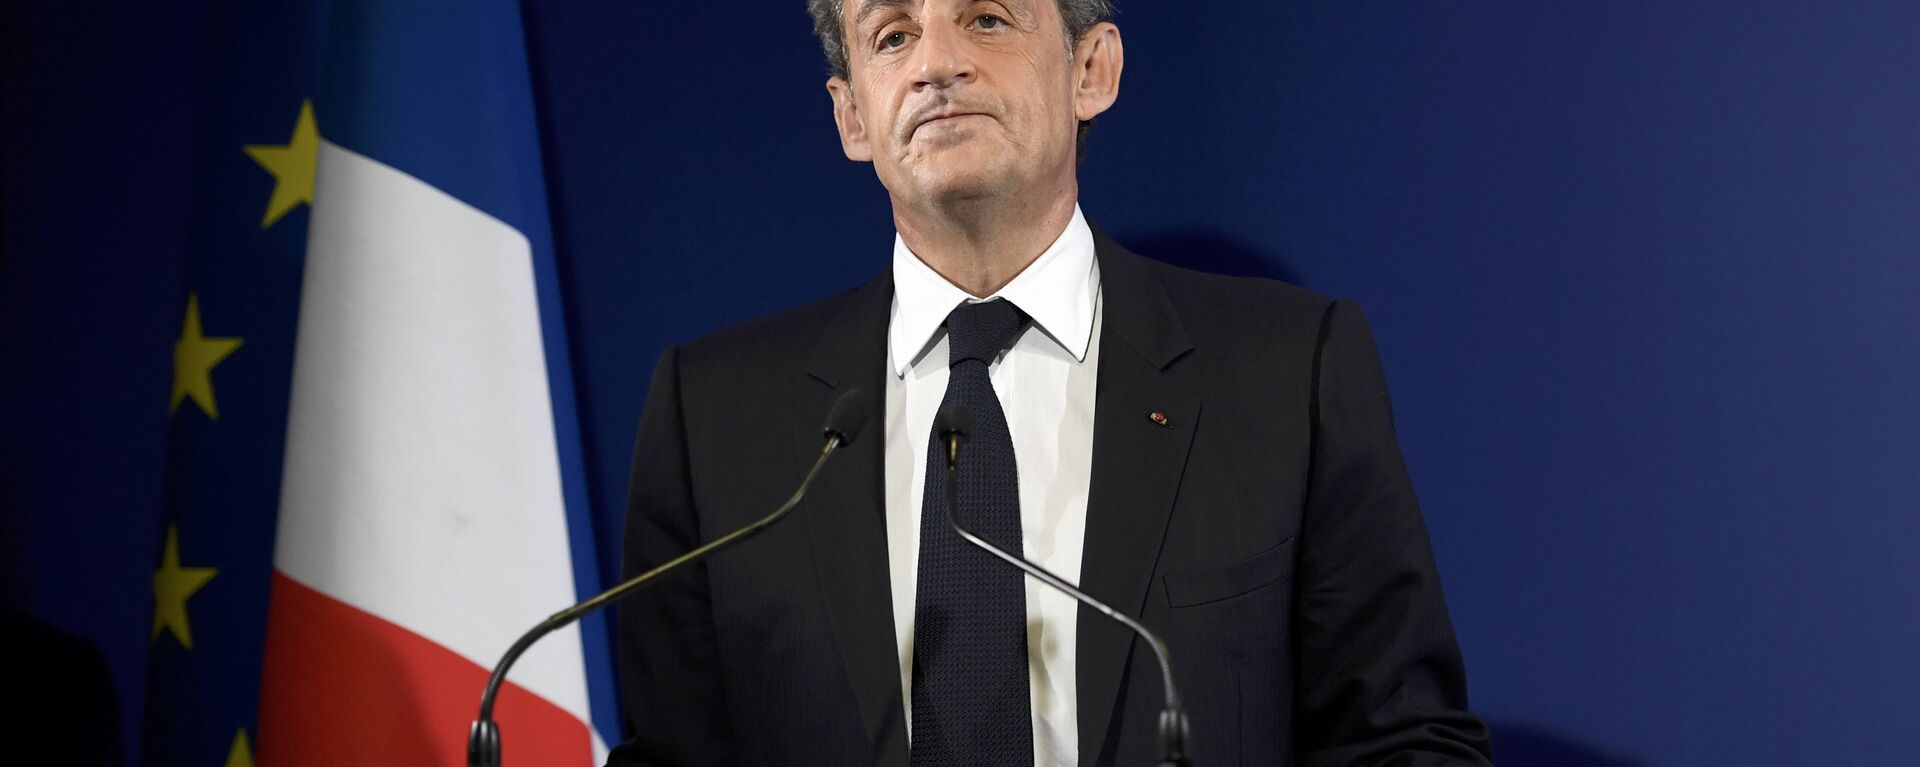 Nicolas Sarkozy, former French president and candidate for the French conservative presidential primary, reacts after partial results in the first round of the French center-right presidential primary election at his campaign headquarters in Paris, France, November 20, 2016. - Sputnik International, 1920, 04.03.2021